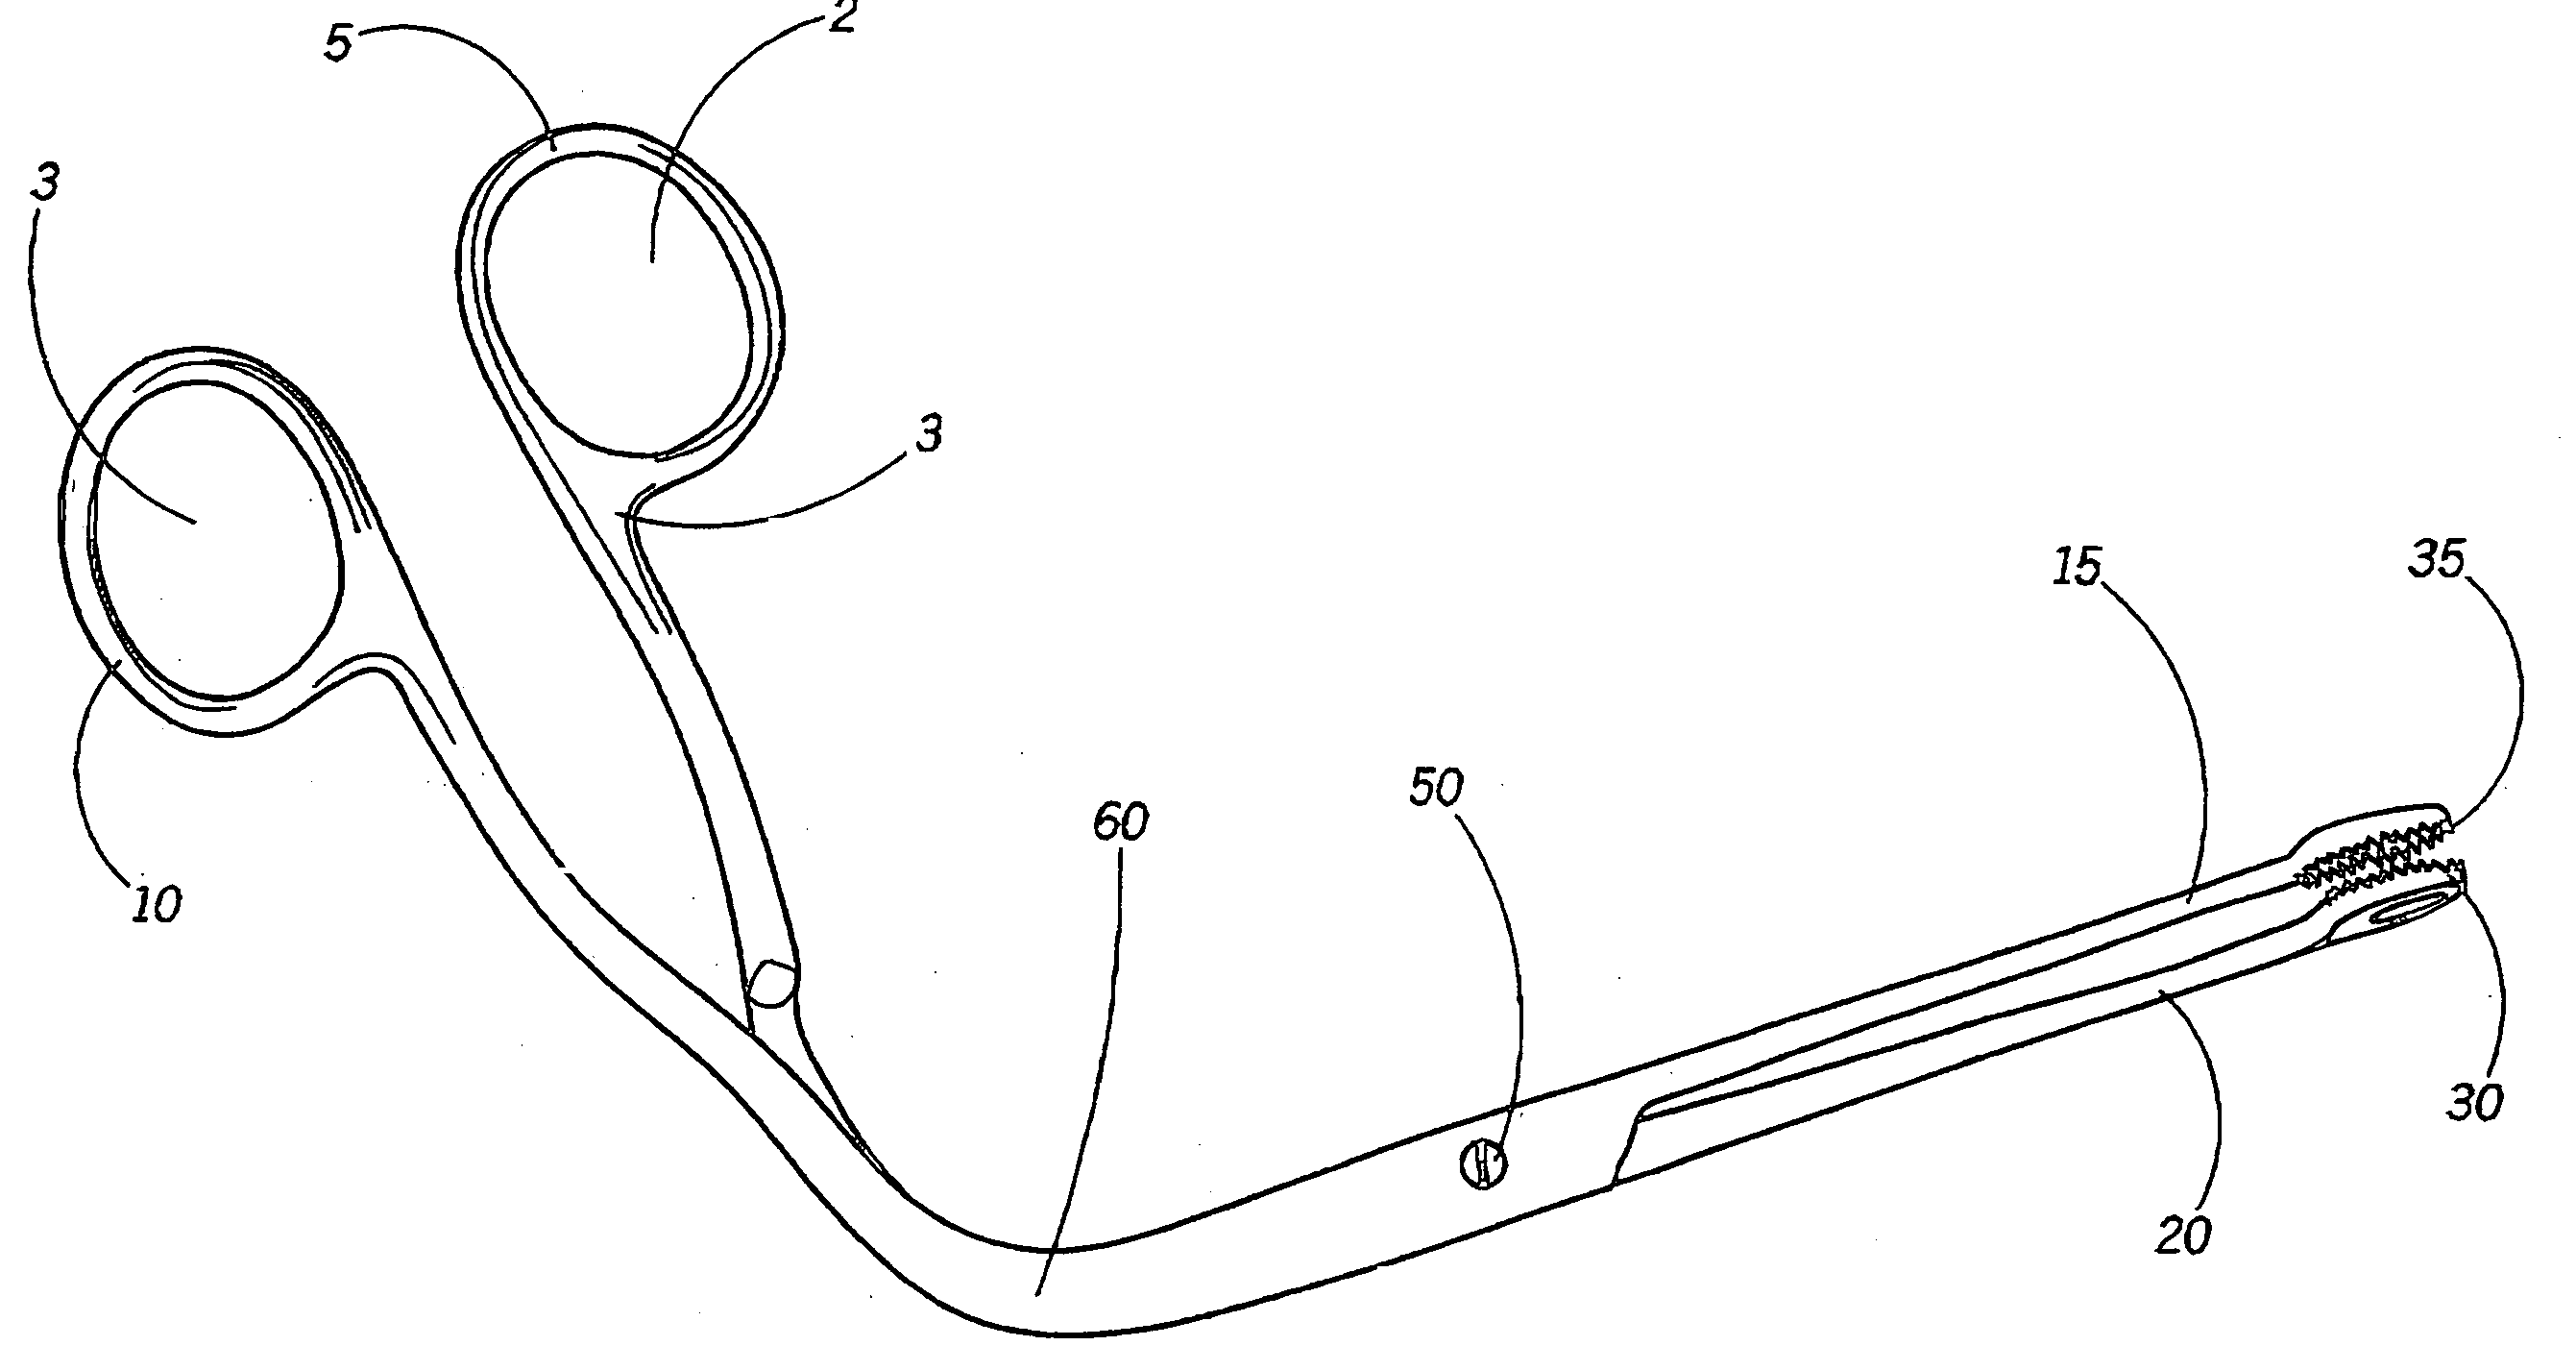 Anesthesia intubating forceps